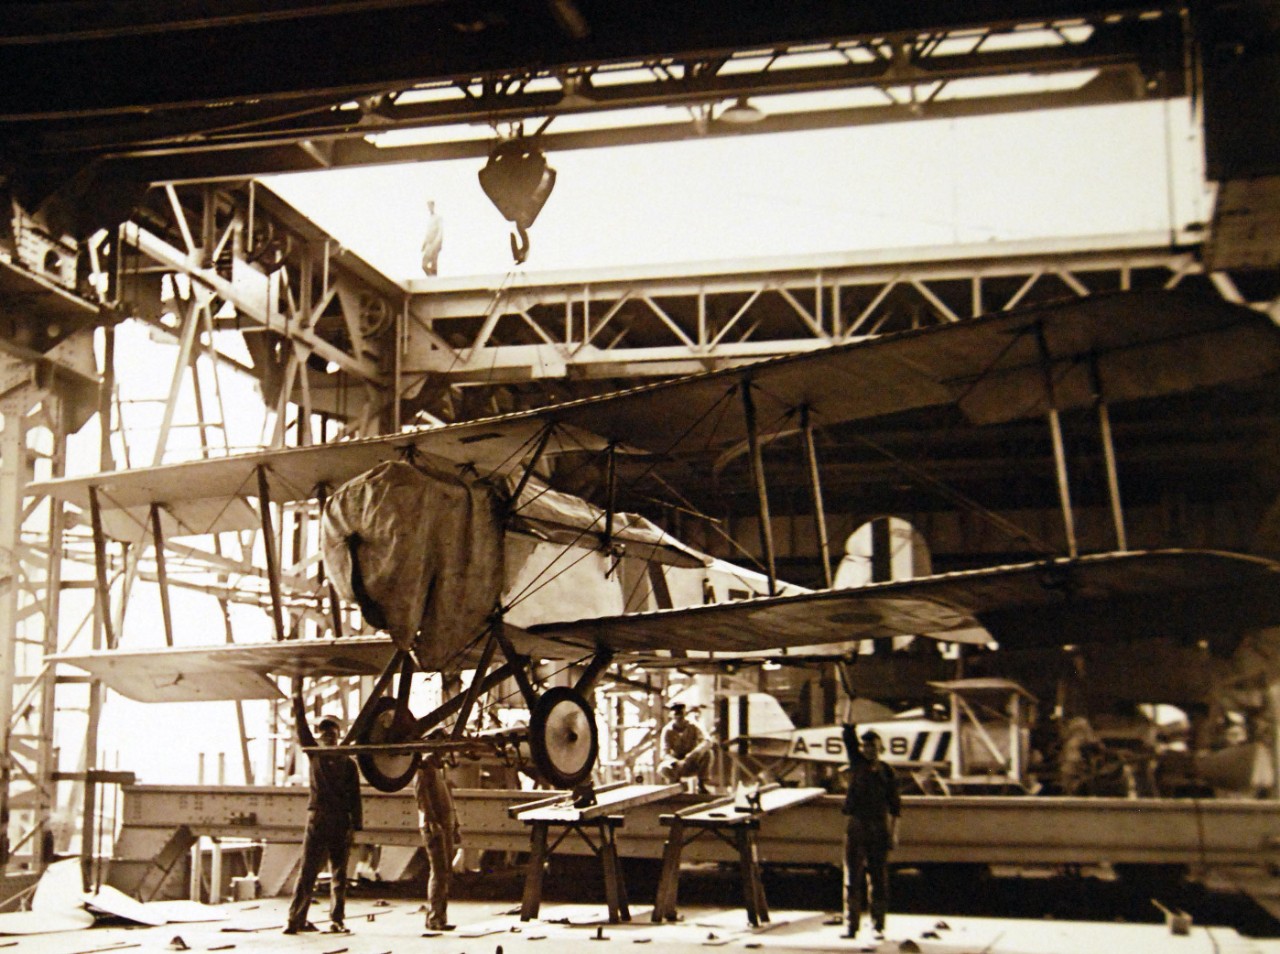 19-NS-L10:   USS Langley (CV 1), , 1923.     Vought AS-1 or VE-7 Plane on traveling crane, July 10, 1923.   Landing plane on skids with traveling crane, before putting it on elevator.   Official U.S. Navy photograph, now in the collections of the National Archives.   (2014/07/2) 